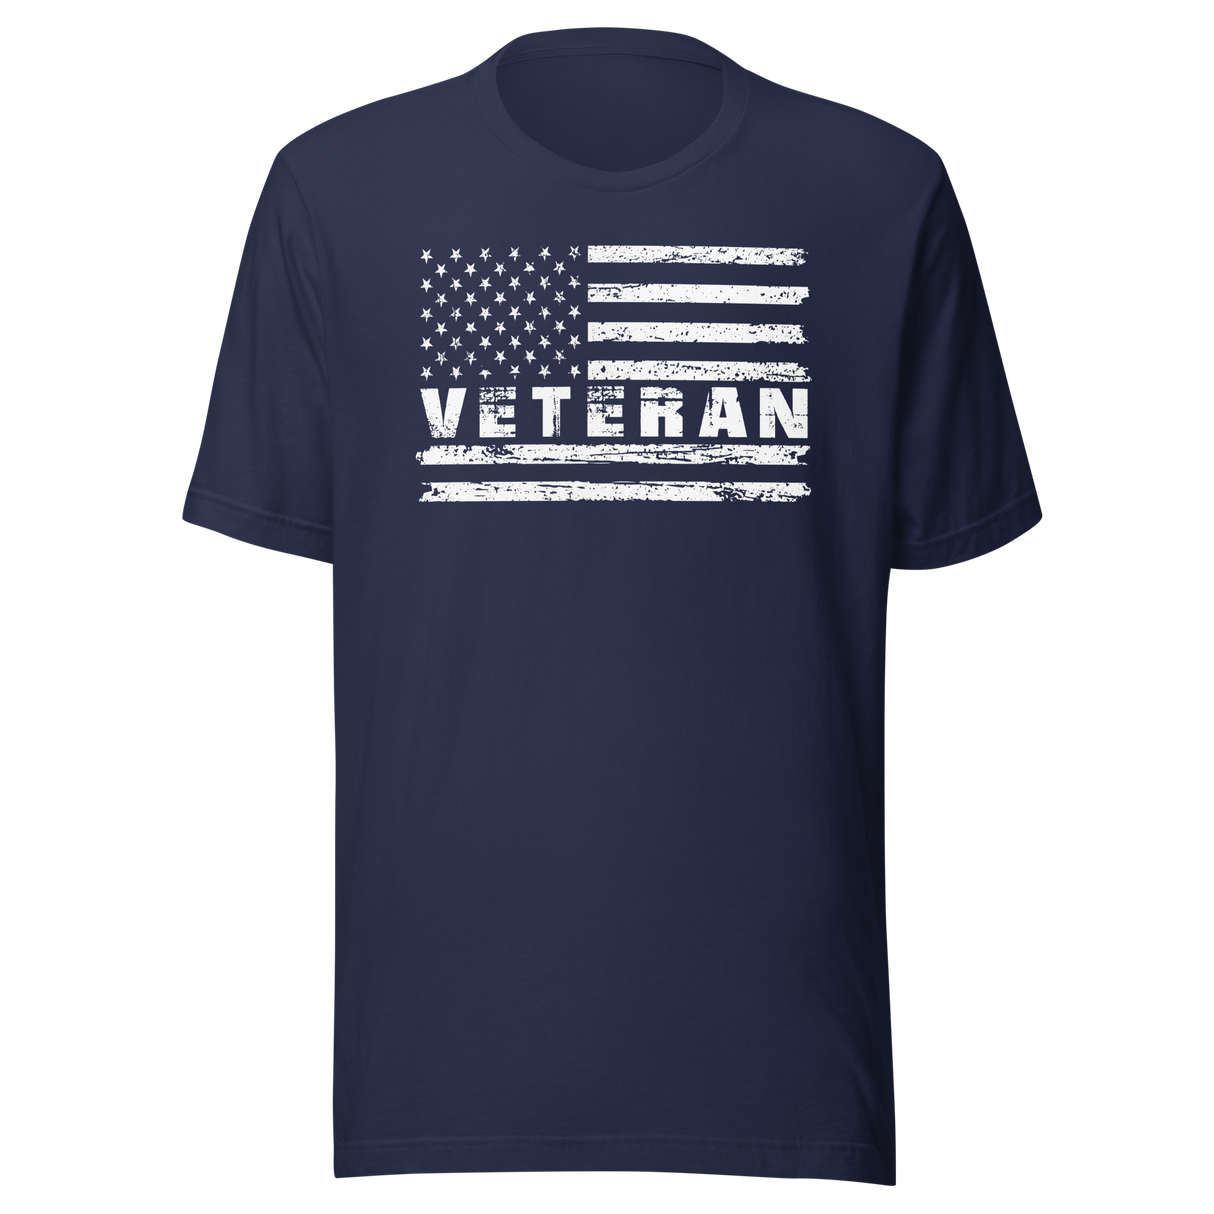 veteran-with-flag-veteran-tee-government-t-shirt-veteran-tee-patriotism-t-shirt-flag-tee#color_navy